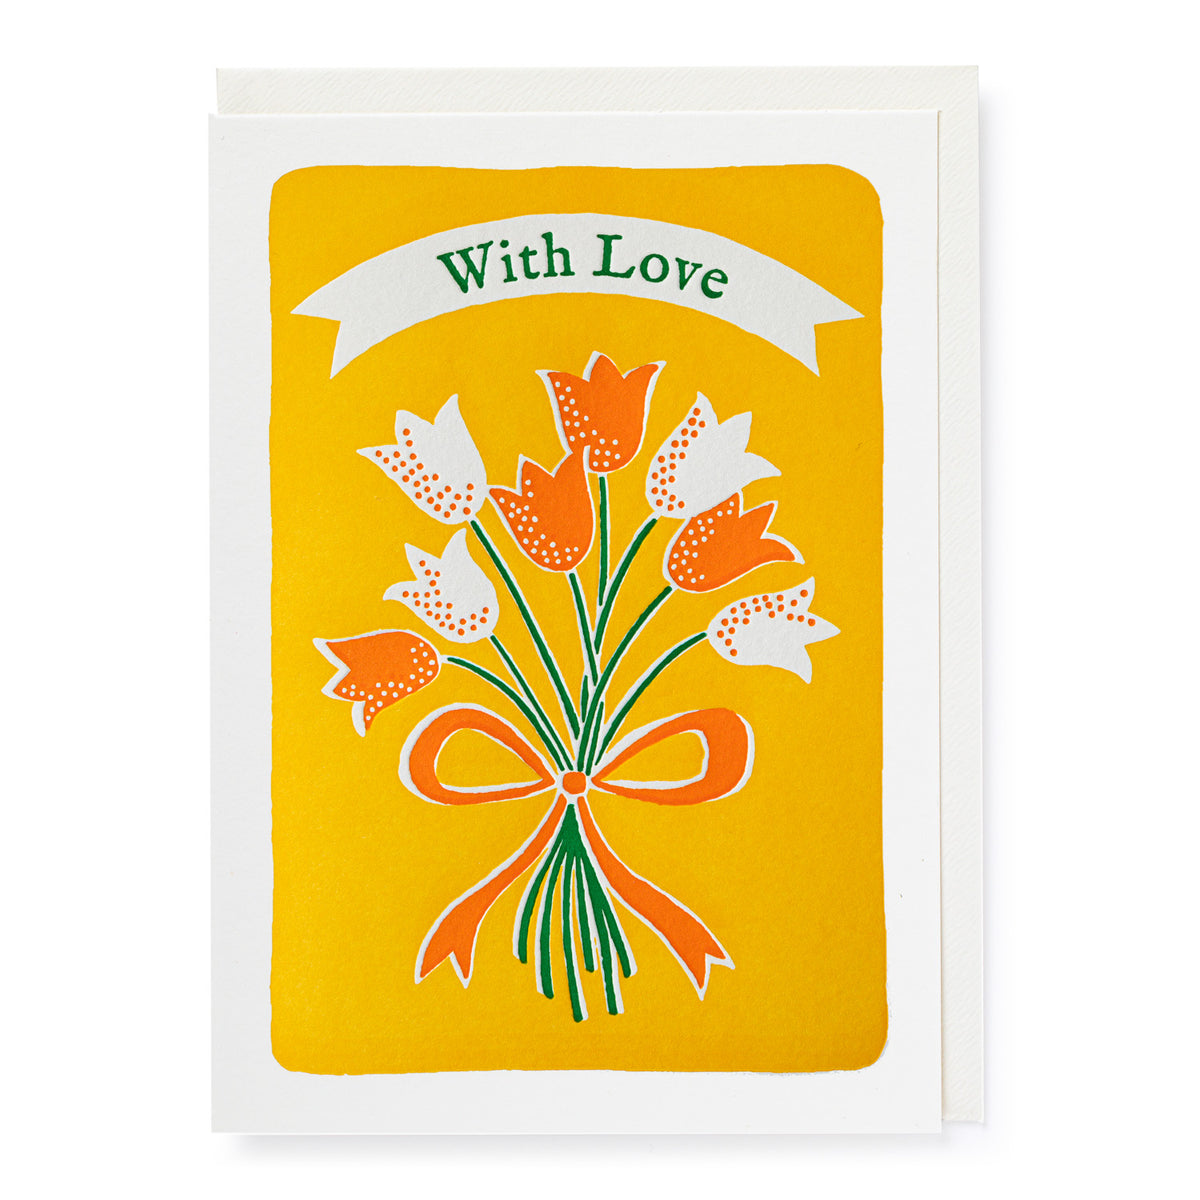 Tulips With Love - letterpress printed greeting card